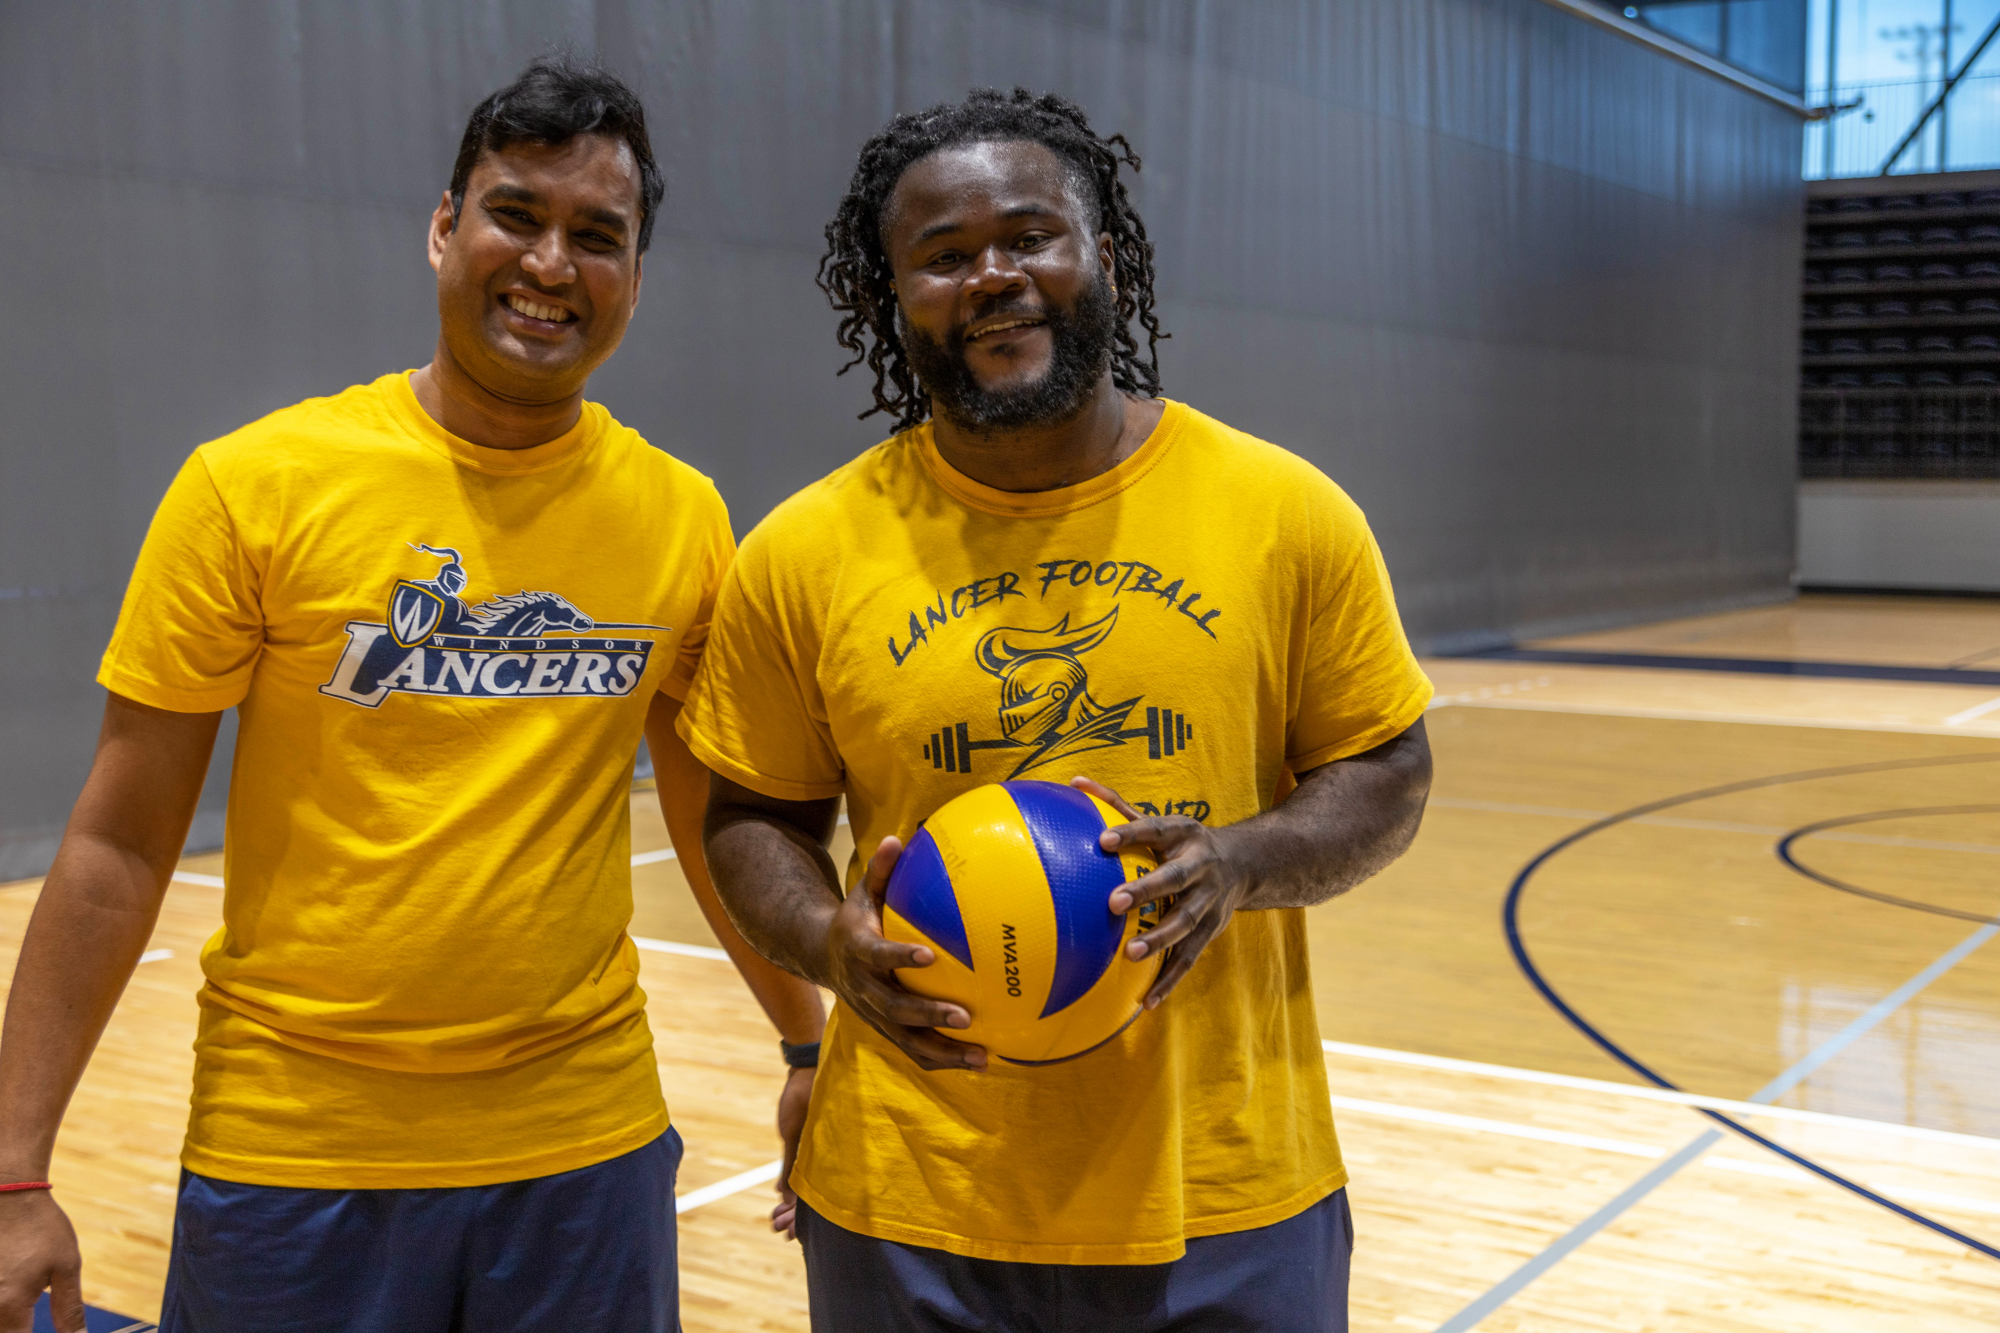 Two student smile holding a volleyball in an intramural volleyball game